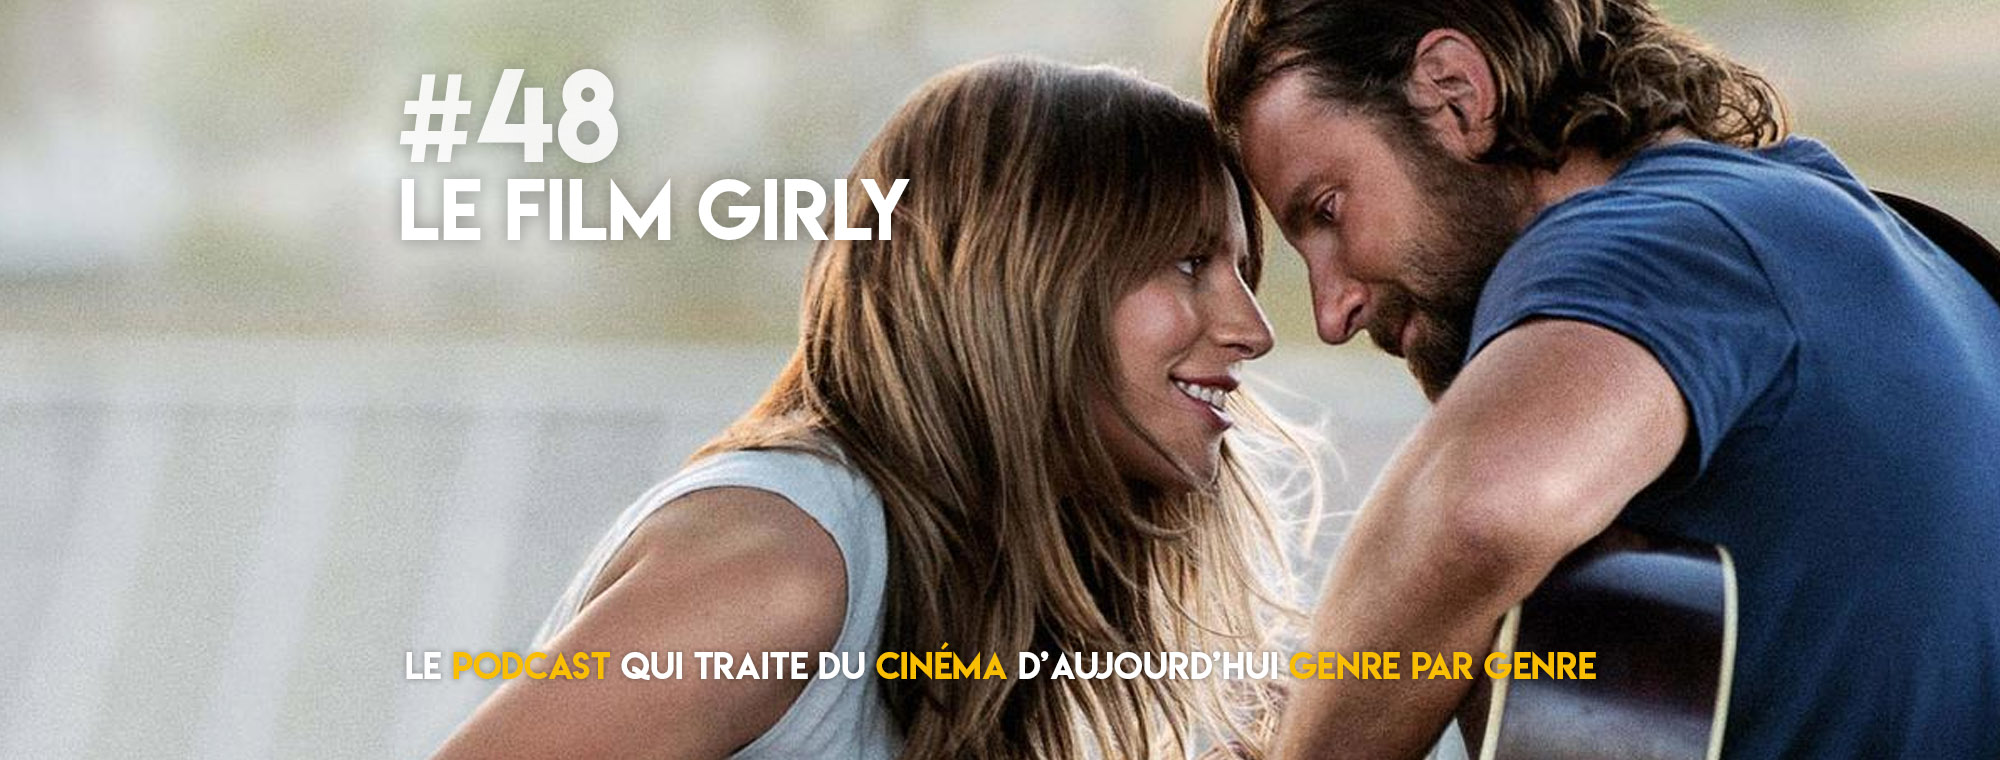 Parlons Péloches - #48 (ft. 2HDP) – Le film girly (live)